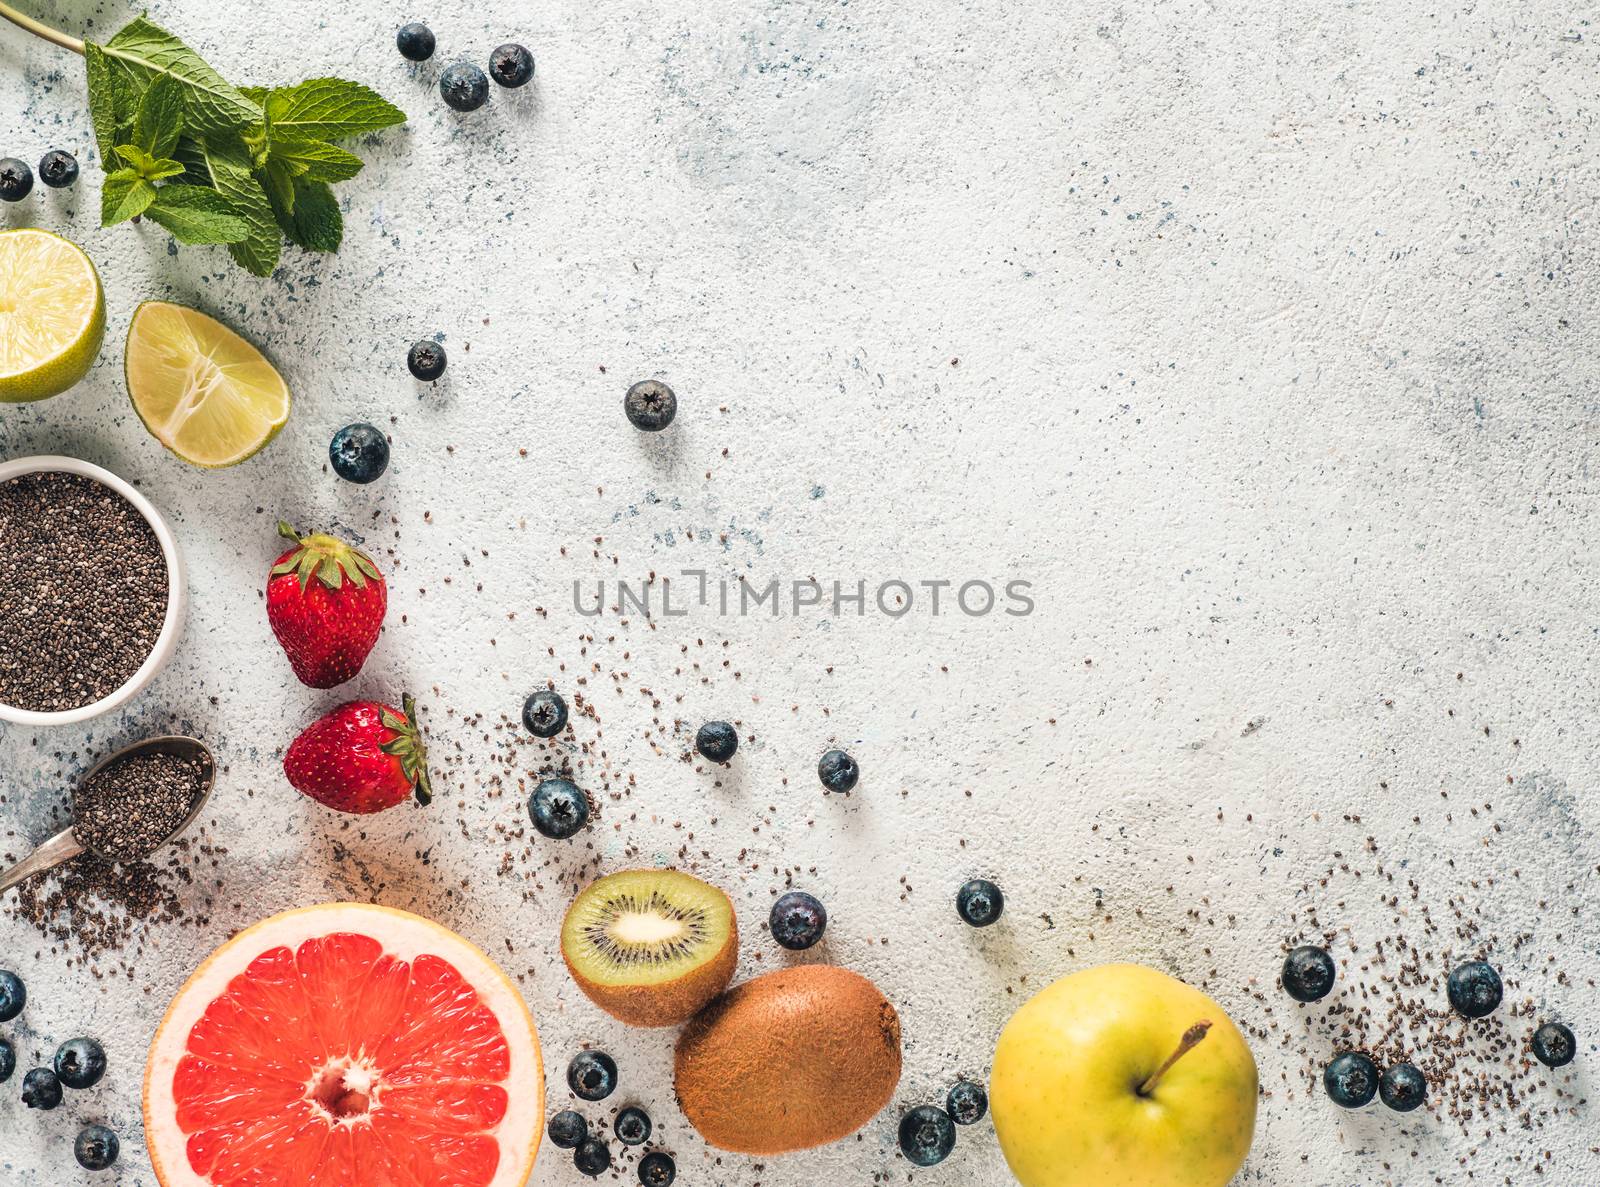 Ingredients for chia water and infused detox drink on gray concrete background. Copy space. Above view, copy space. Fresh fruits, berries, chia seeds and mint. Healthy food, detox, diet, vegan concept